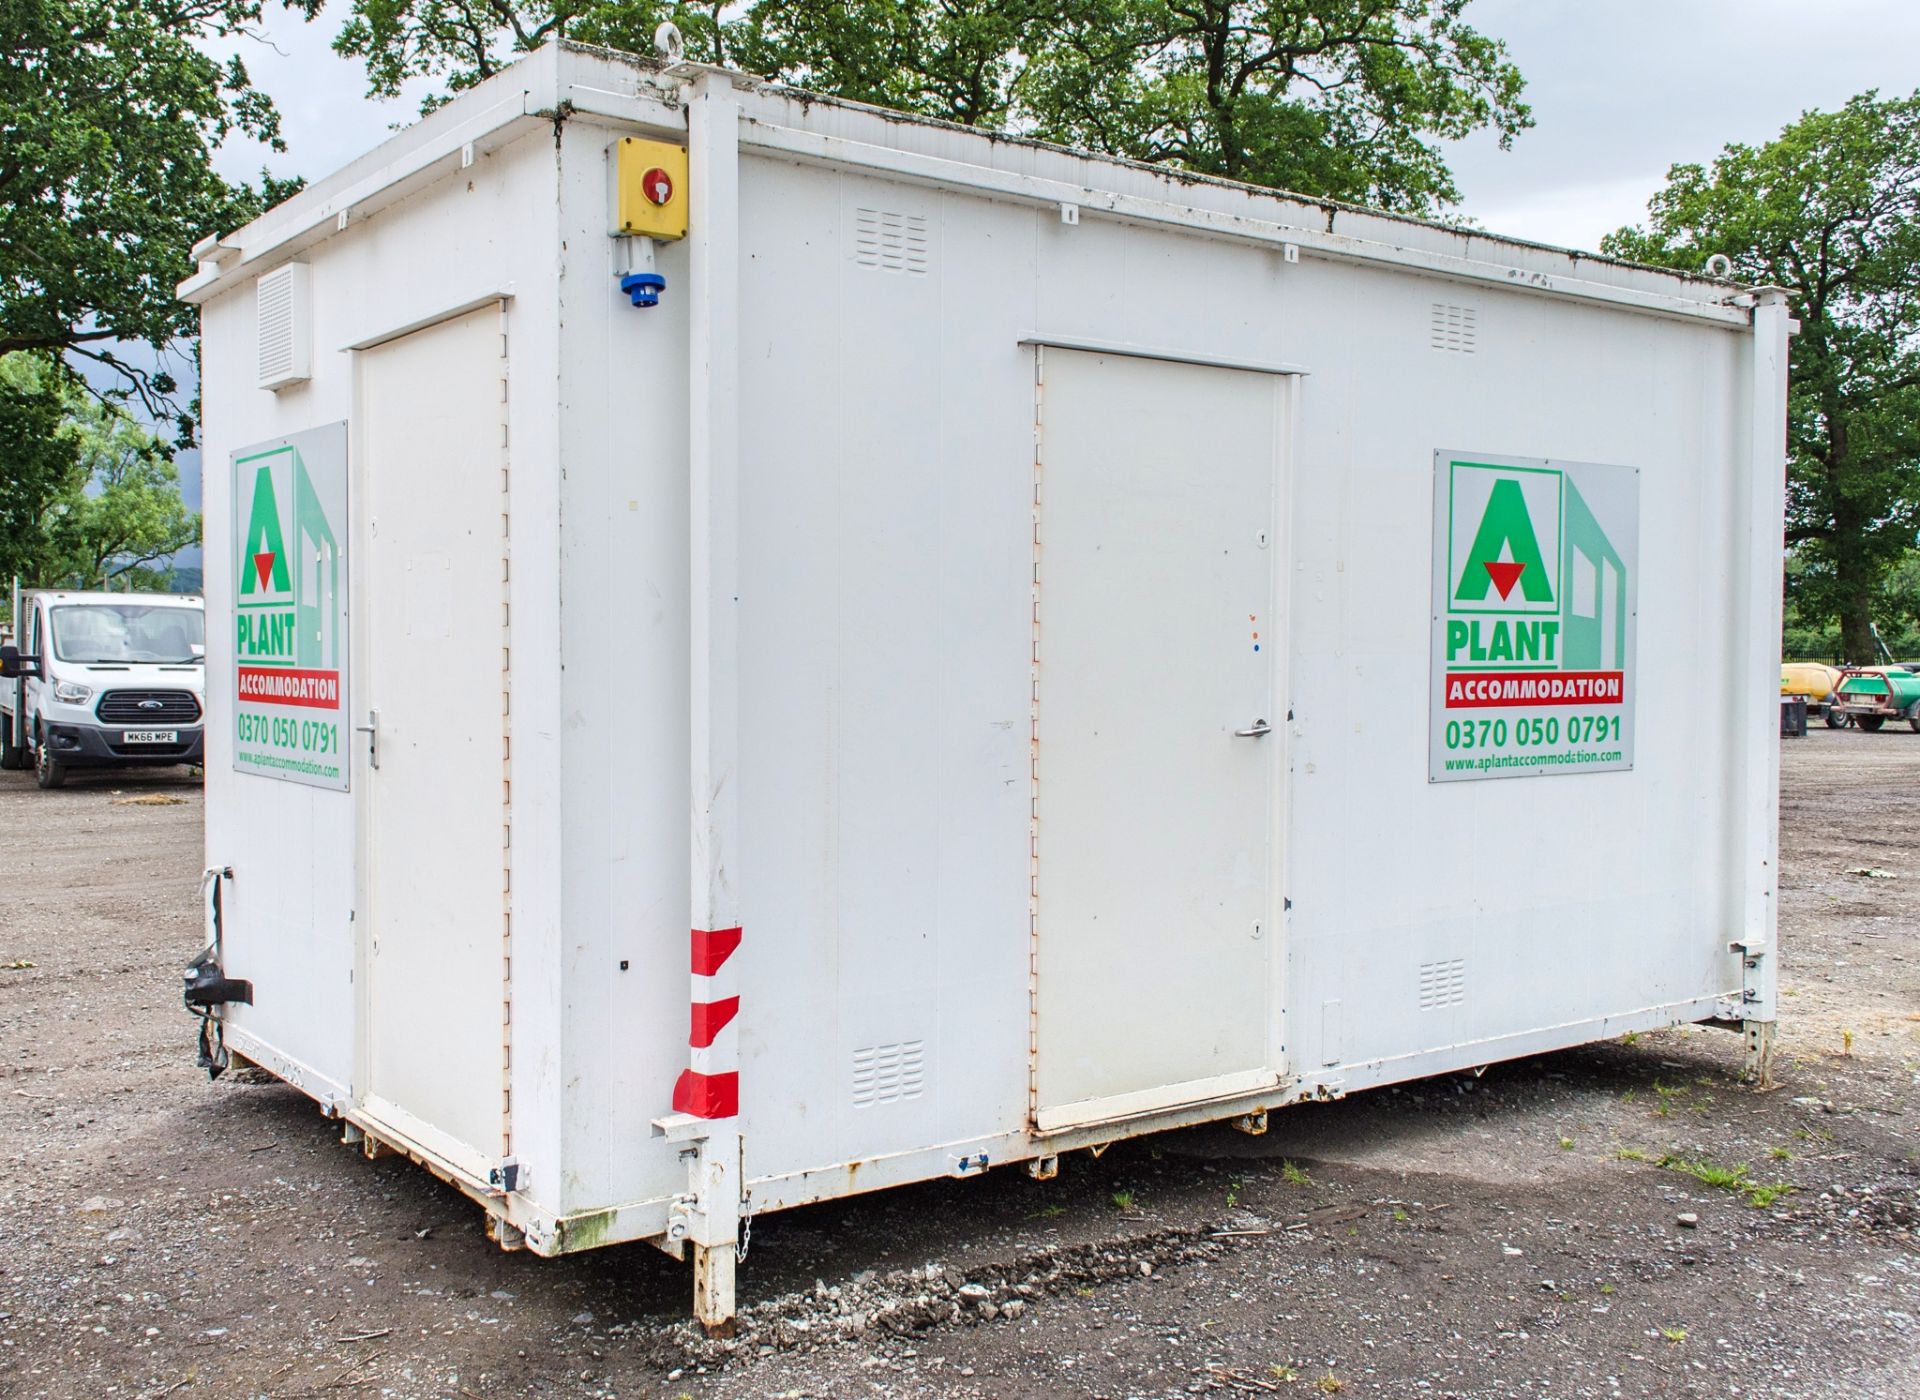 16 ft x 9 ft steel 3 + 1 toilet site unit Comprising of: Gents toilet (3 - cubicles, 3 - urinals & 2 - Image 2 of 11